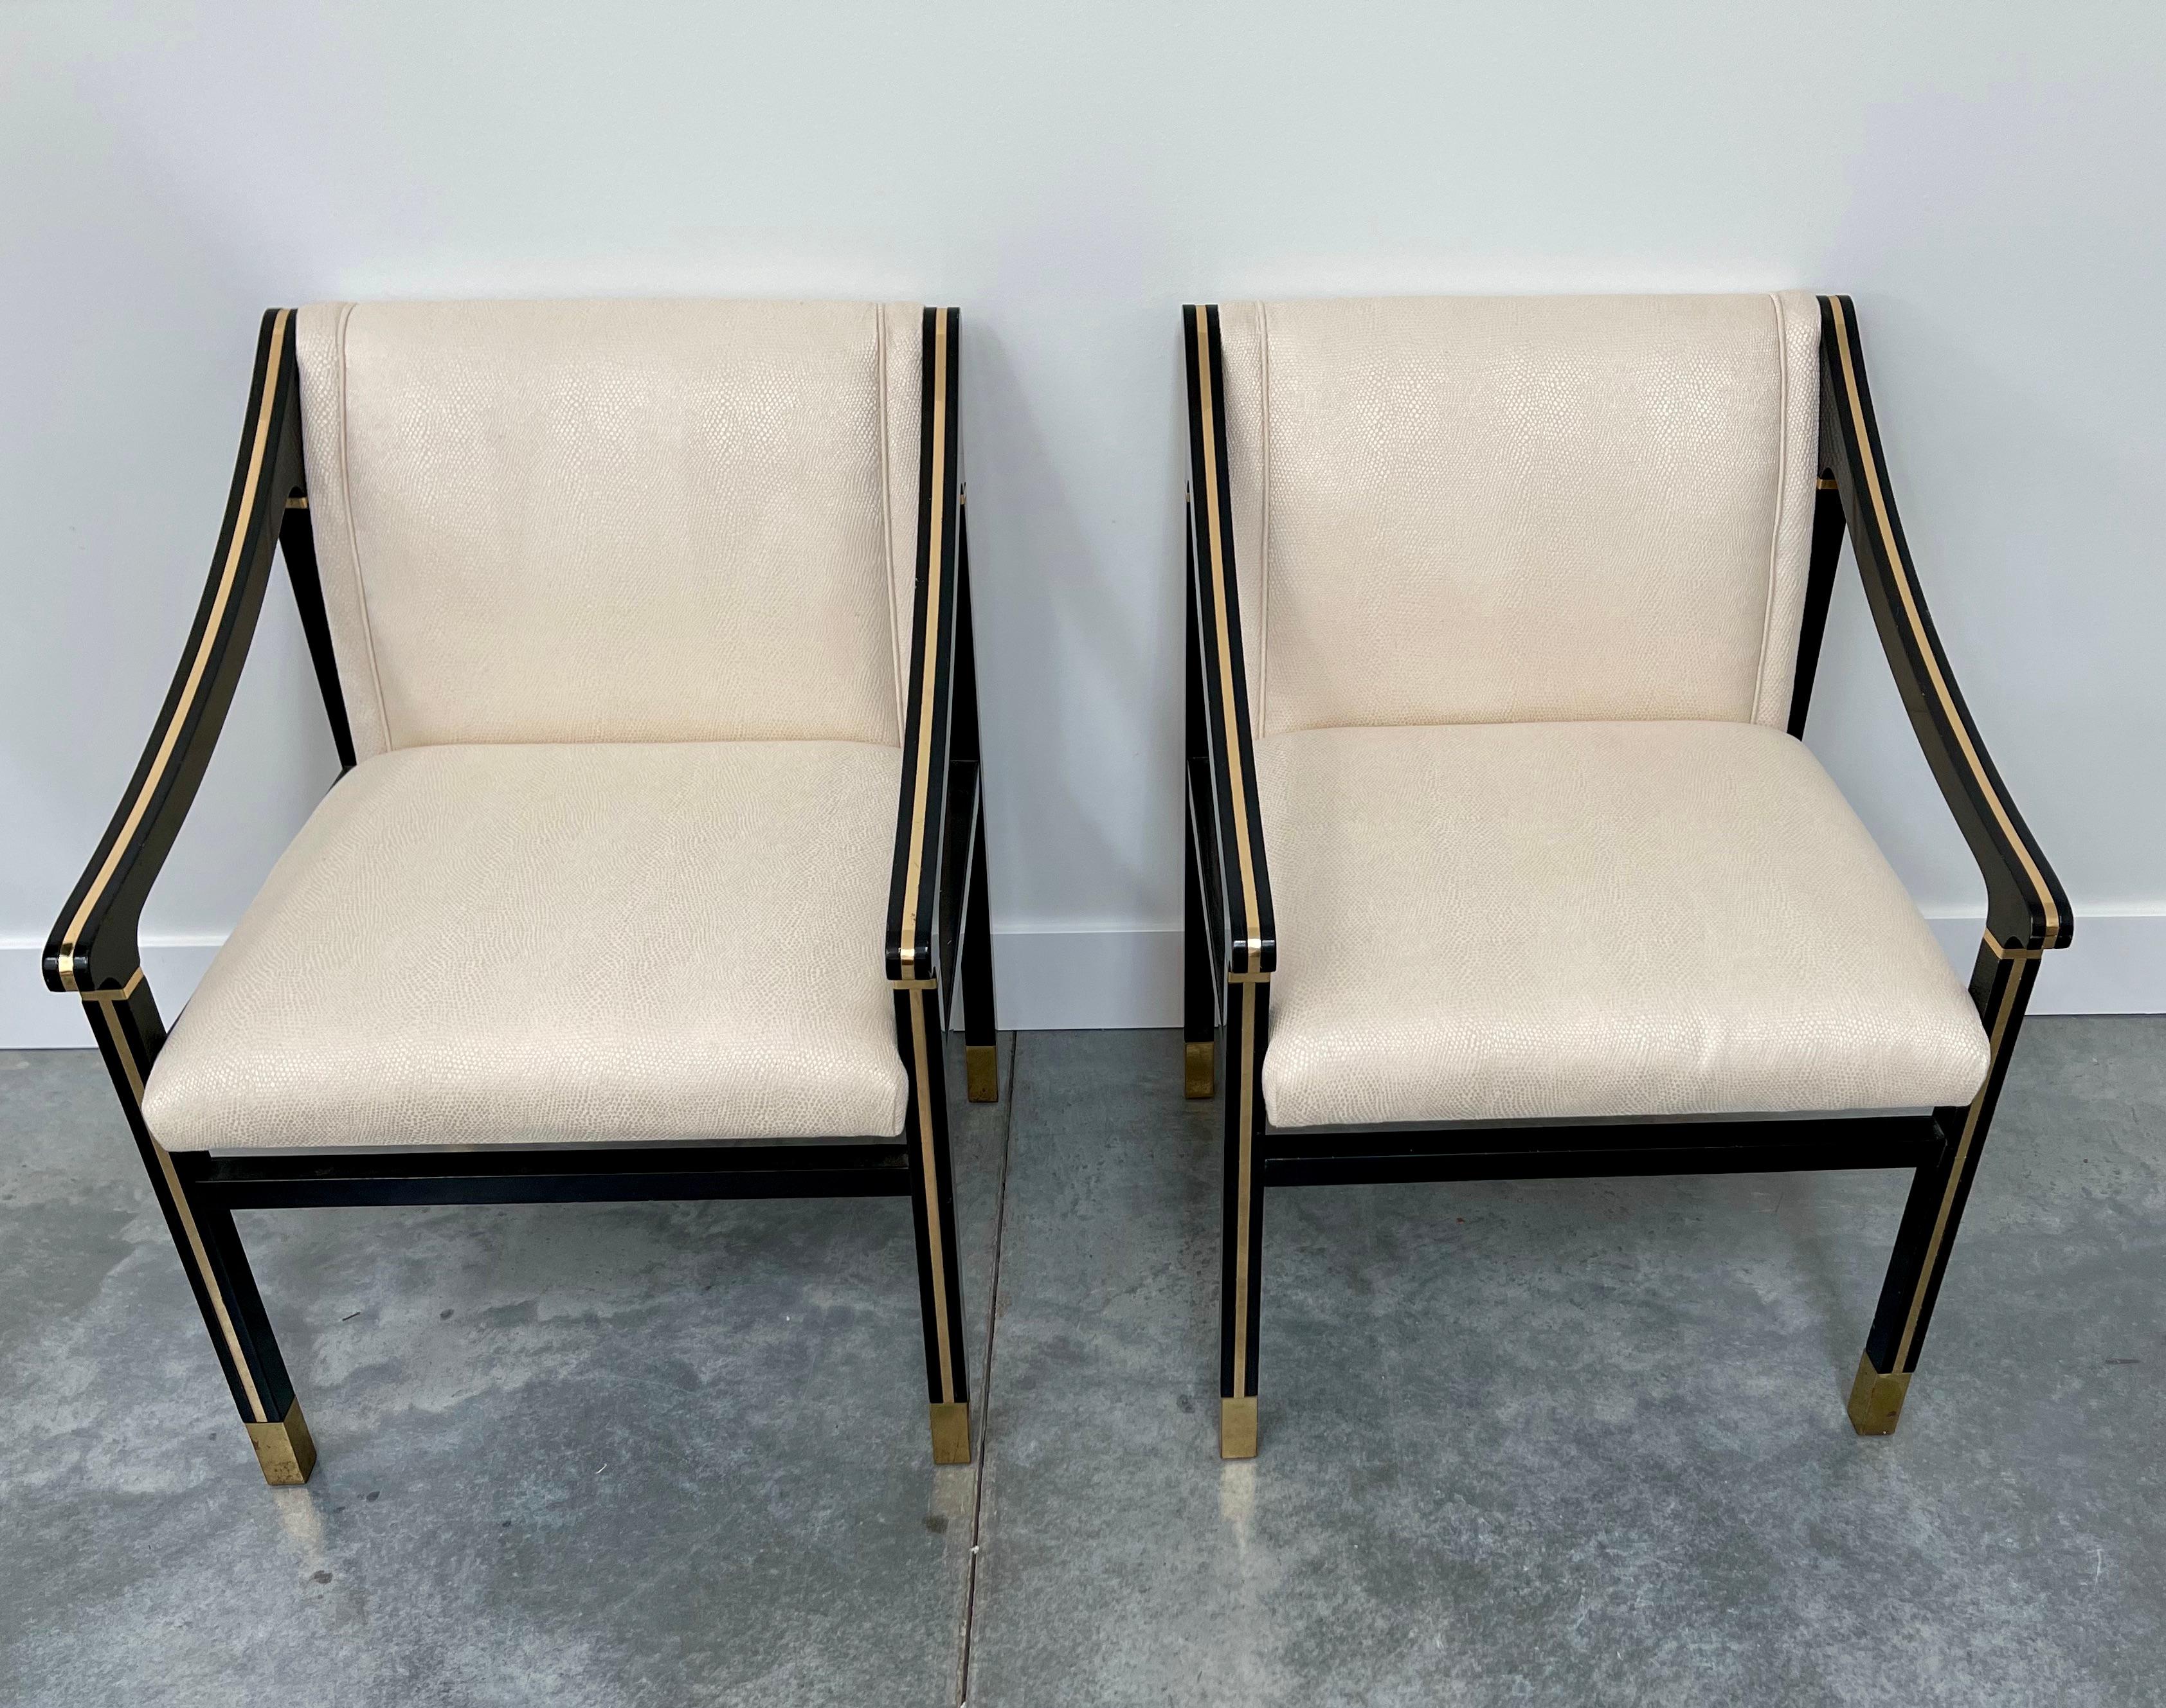 American Mid-Century Modern Mastercraft Black and Brass Chairs, a Pair